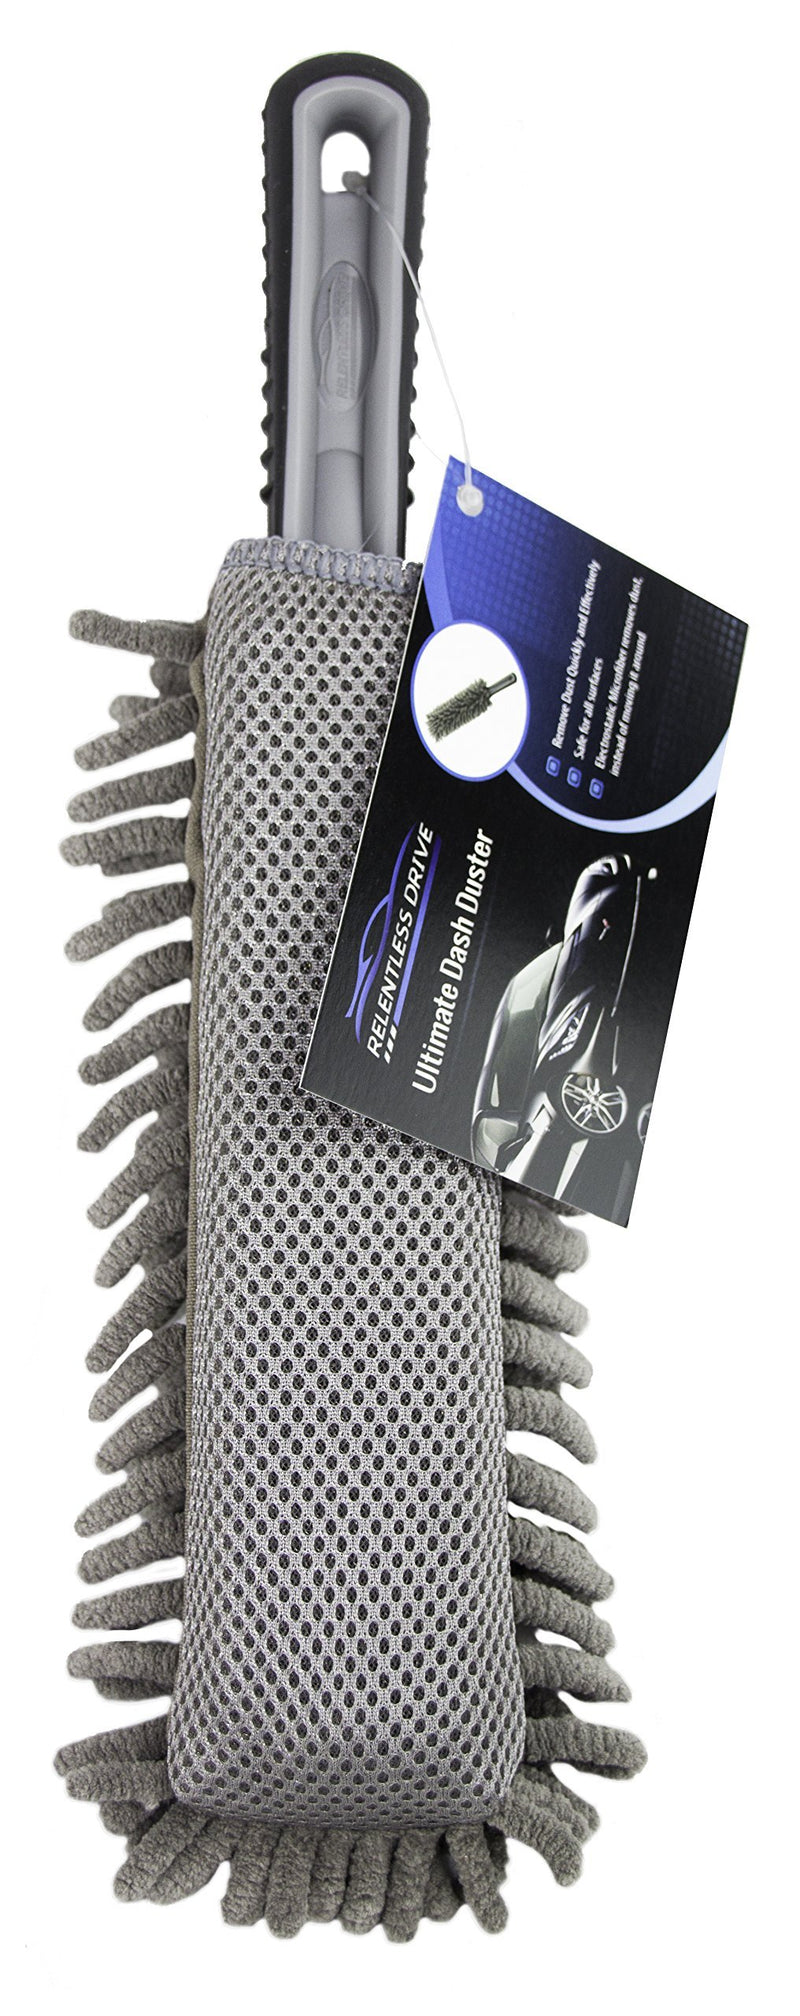  [AUSTRALIA] - Relentless Drive Ultimate Dash Duster - The Best Microfiber Multipurpose Duster - Car and Home Interior Use - Professional Detailing Tool - Lint Free - Unbreakable Comfort Handle 1 Pack